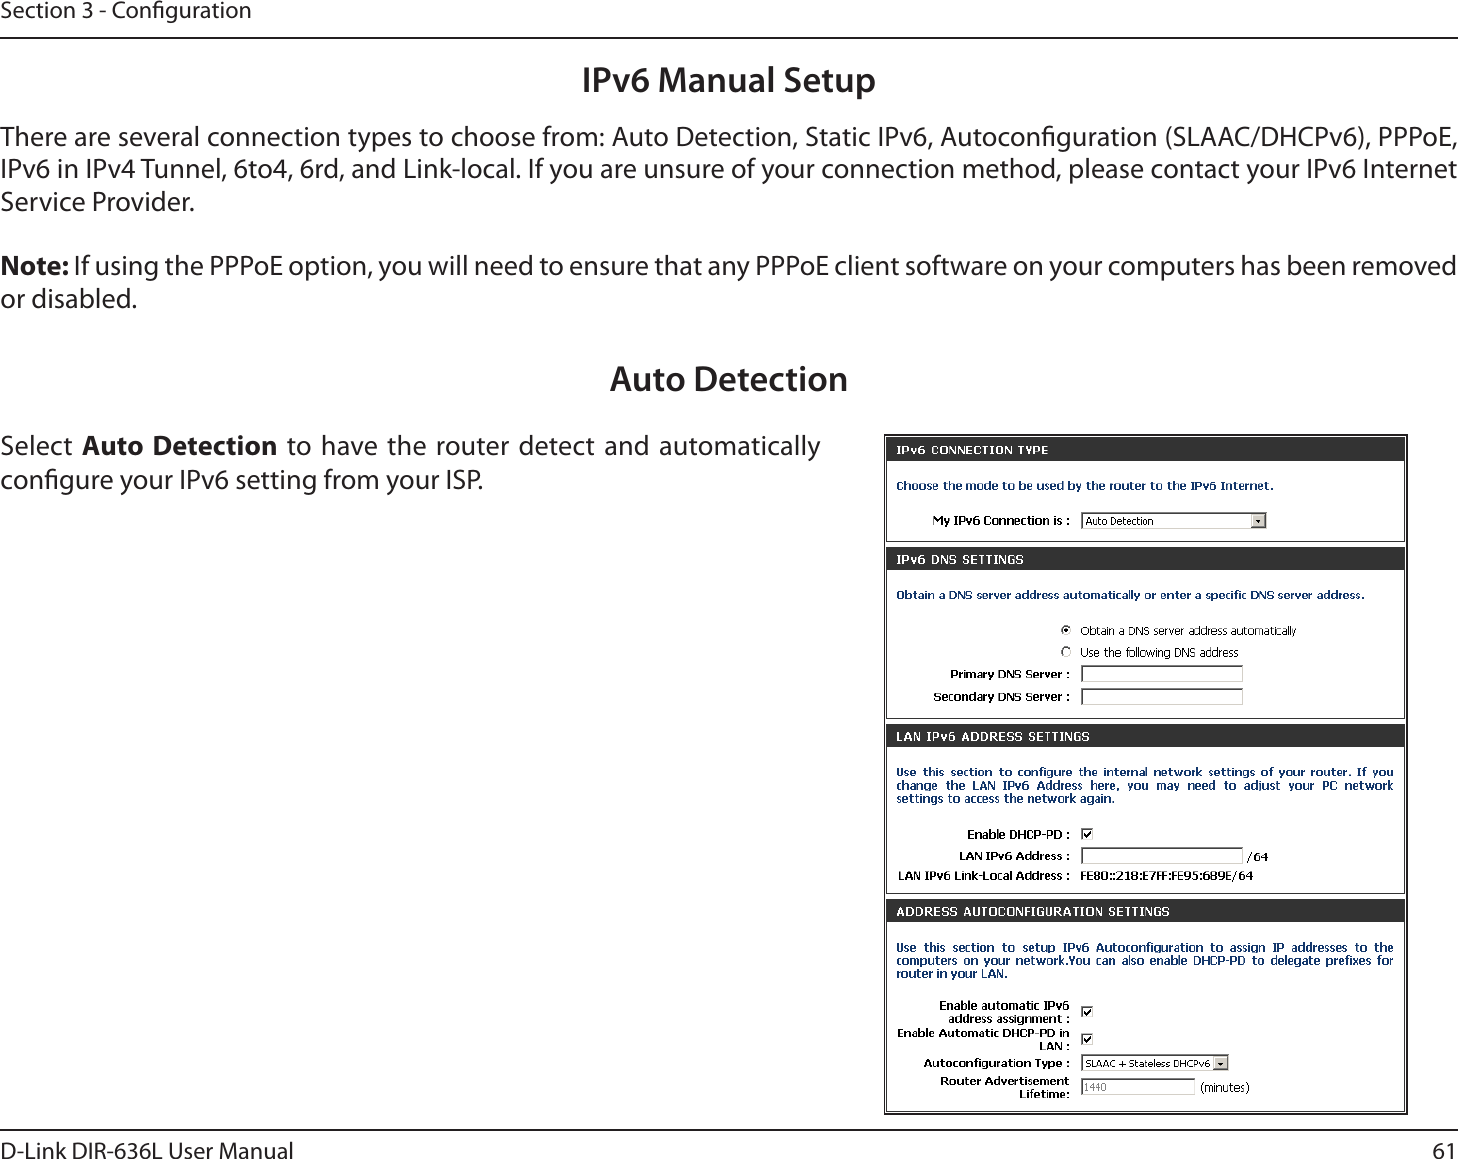 61D-Link DIR-636L User ManualSection 3 - CongurationIPv6 Manual SetupThere are several connection types to choose from: Auto Detection, Static IPv6, Autoconguration (SLAAC/DHCPv6), PPPoE, IPv6 in IPv4 Tunnel, 6to4, 6rd, and Link-local. If you are unsure of your connection method, please contact your IPv6 Internet Service Provider. Note: If using the PPPoE option, you will need to ensure that any PPPoE client software on your computers has been removed or disabled.Auto DetectionSelect Auto Detection to have the router detect and automatically congure your IPv6 setting from your ISP.